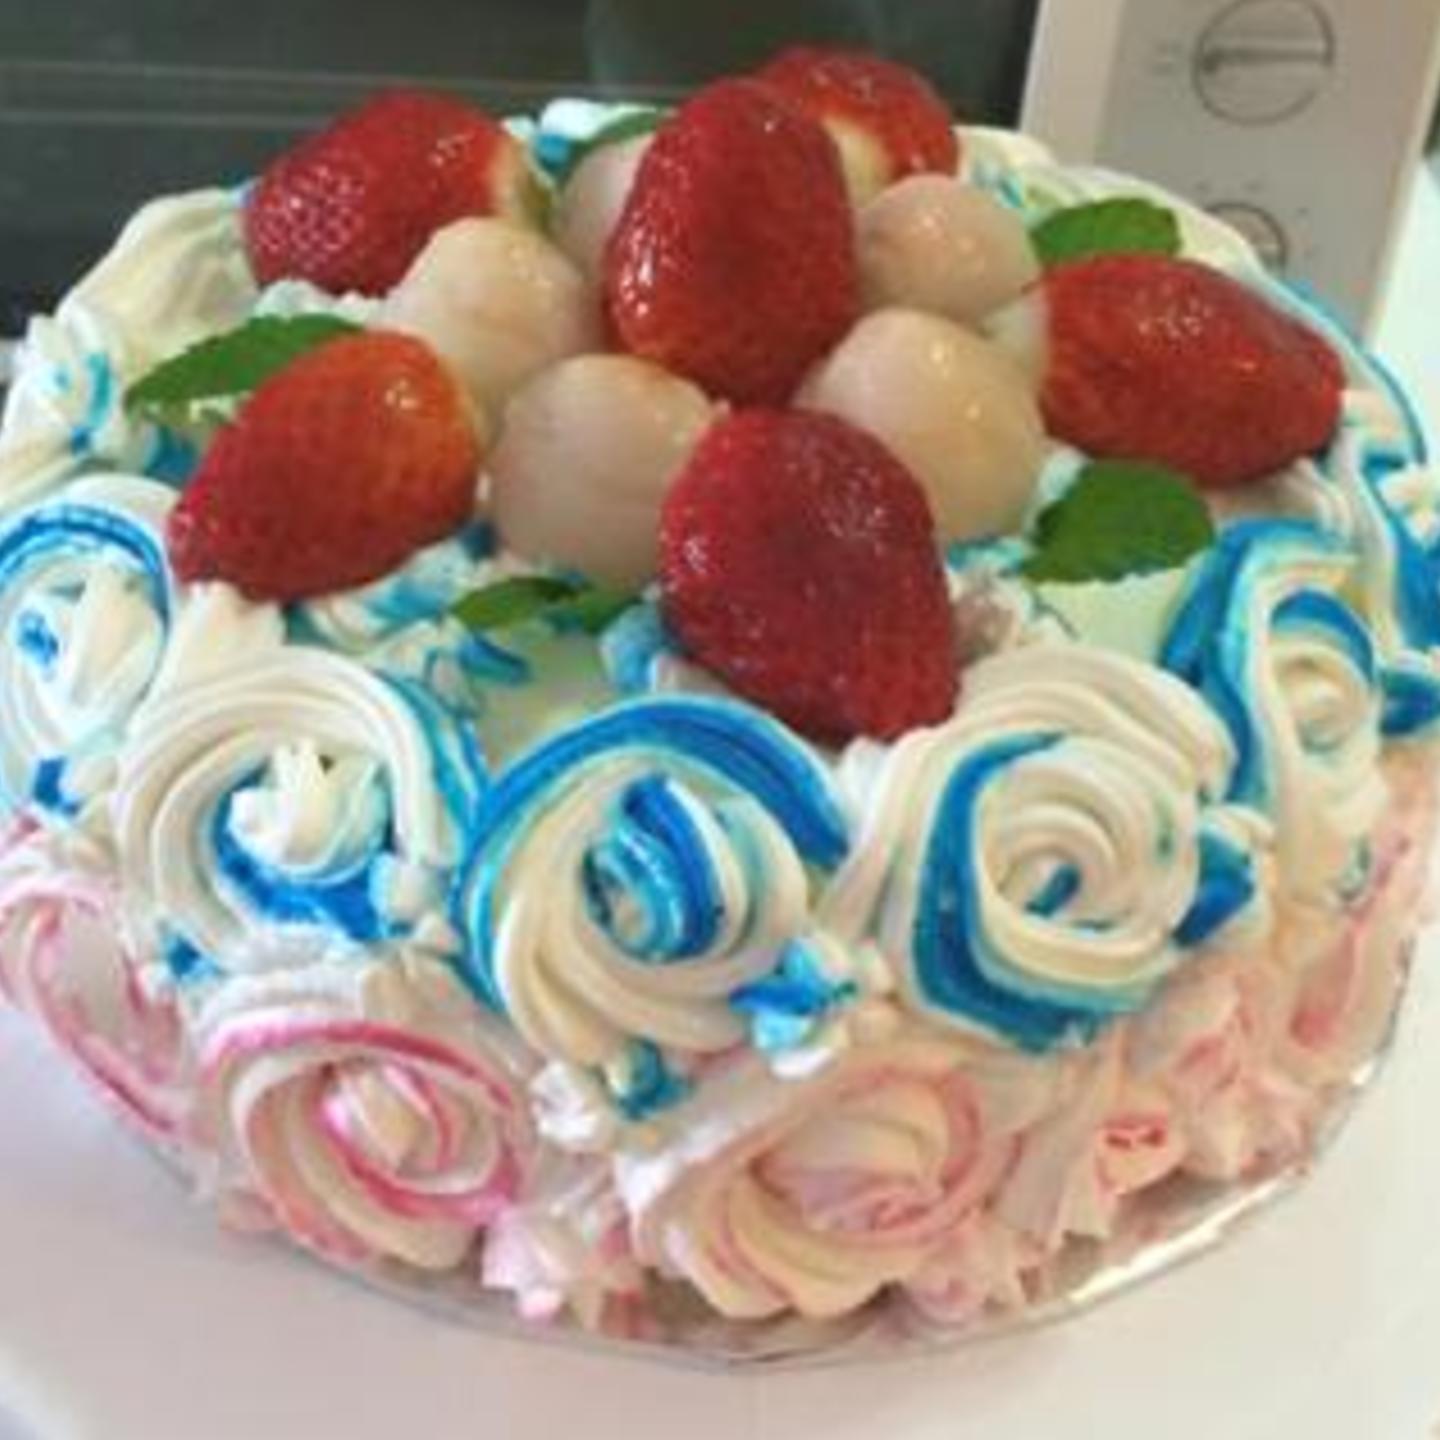 Colorful life- Strawberries and Lychee Cake